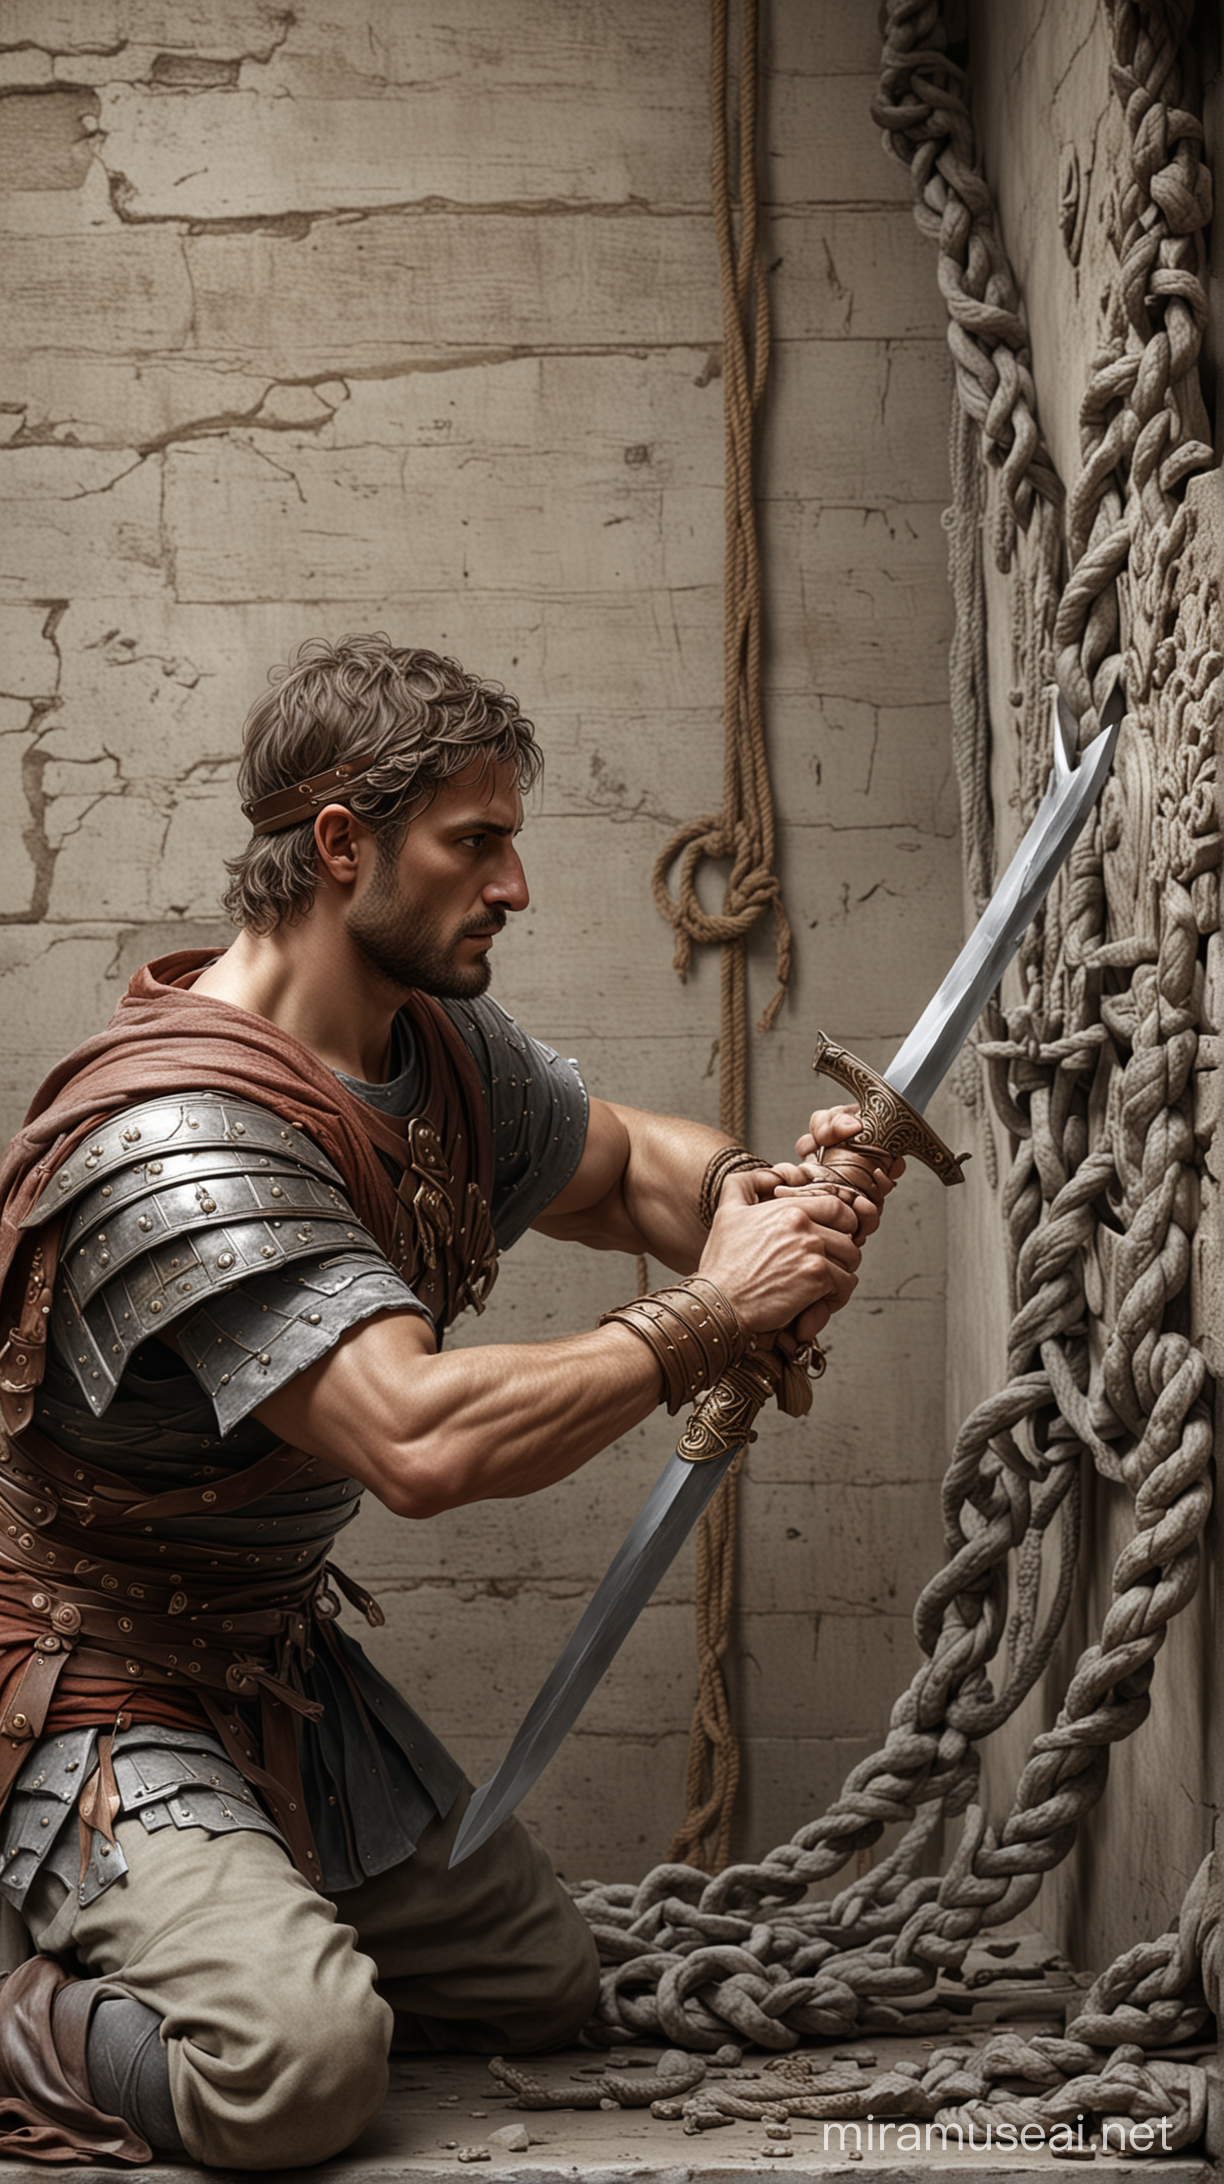 Illustration of Alexander drawing his sword to cut through the Gordian knot, solving the problem with force.Hyper realistic